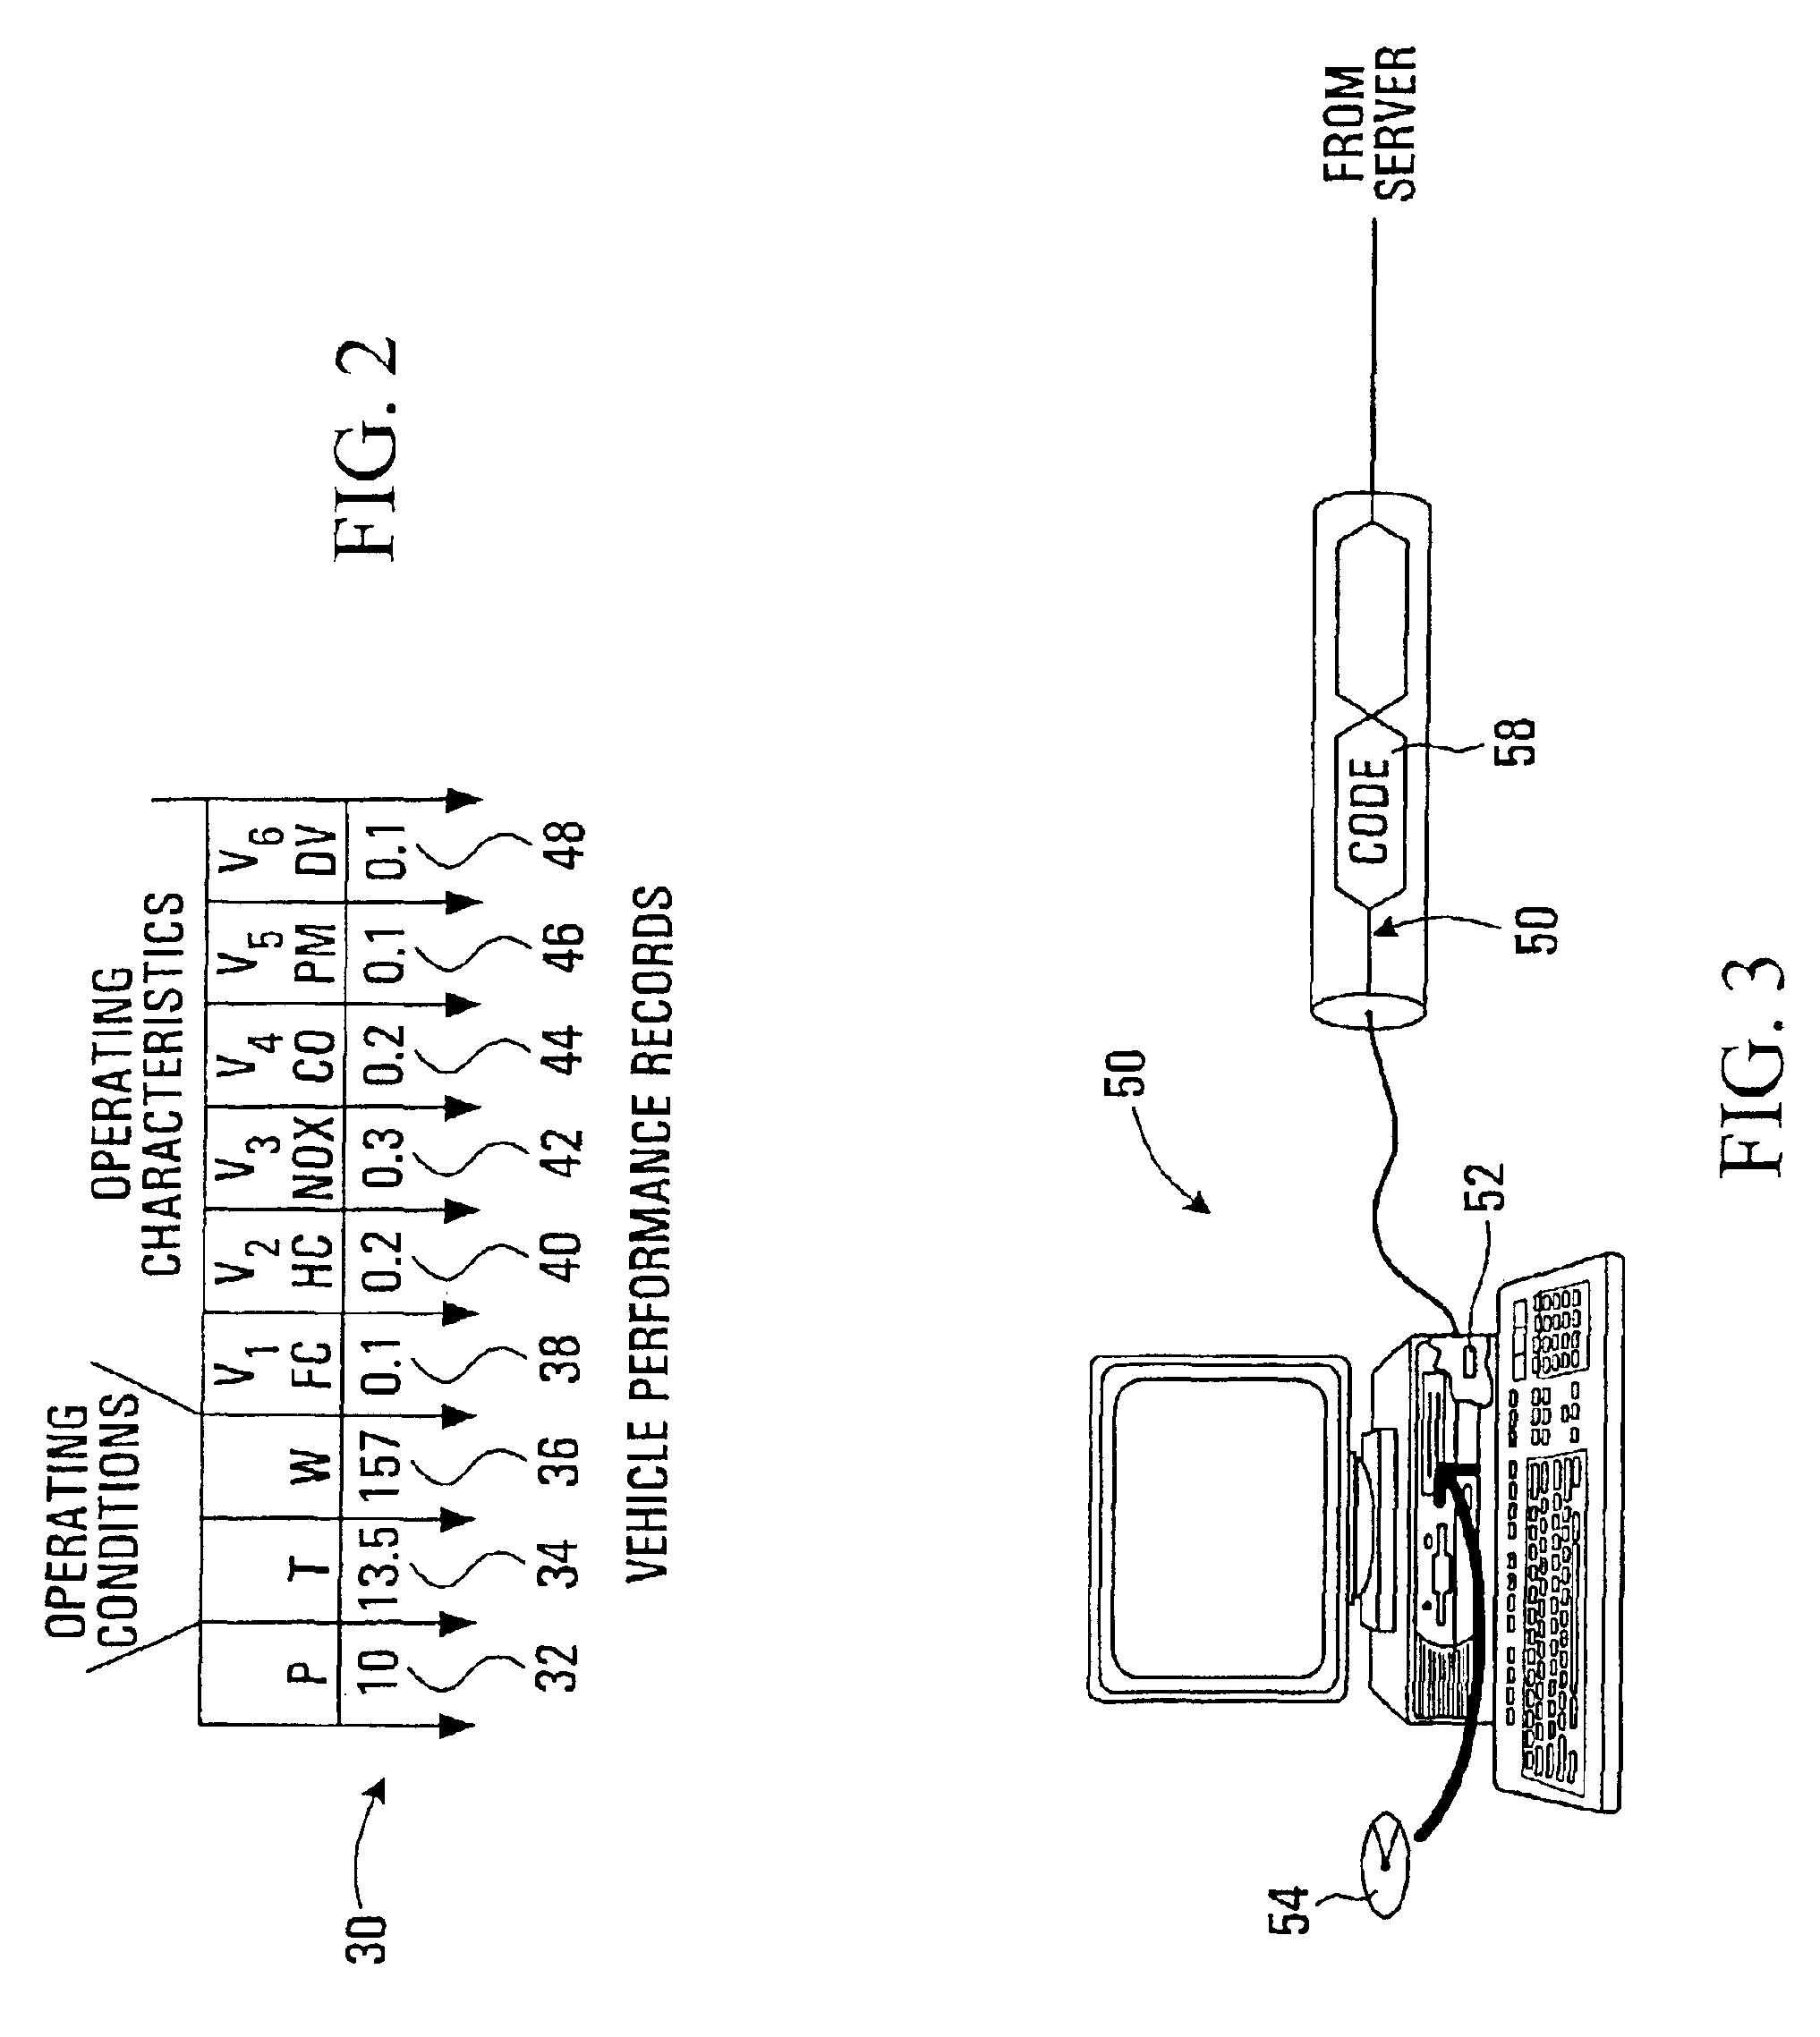 Process, apparatus, media and signals for controlling operating conditions of a hybrid electric vehicle to optimize operating characteristics of the vehicle